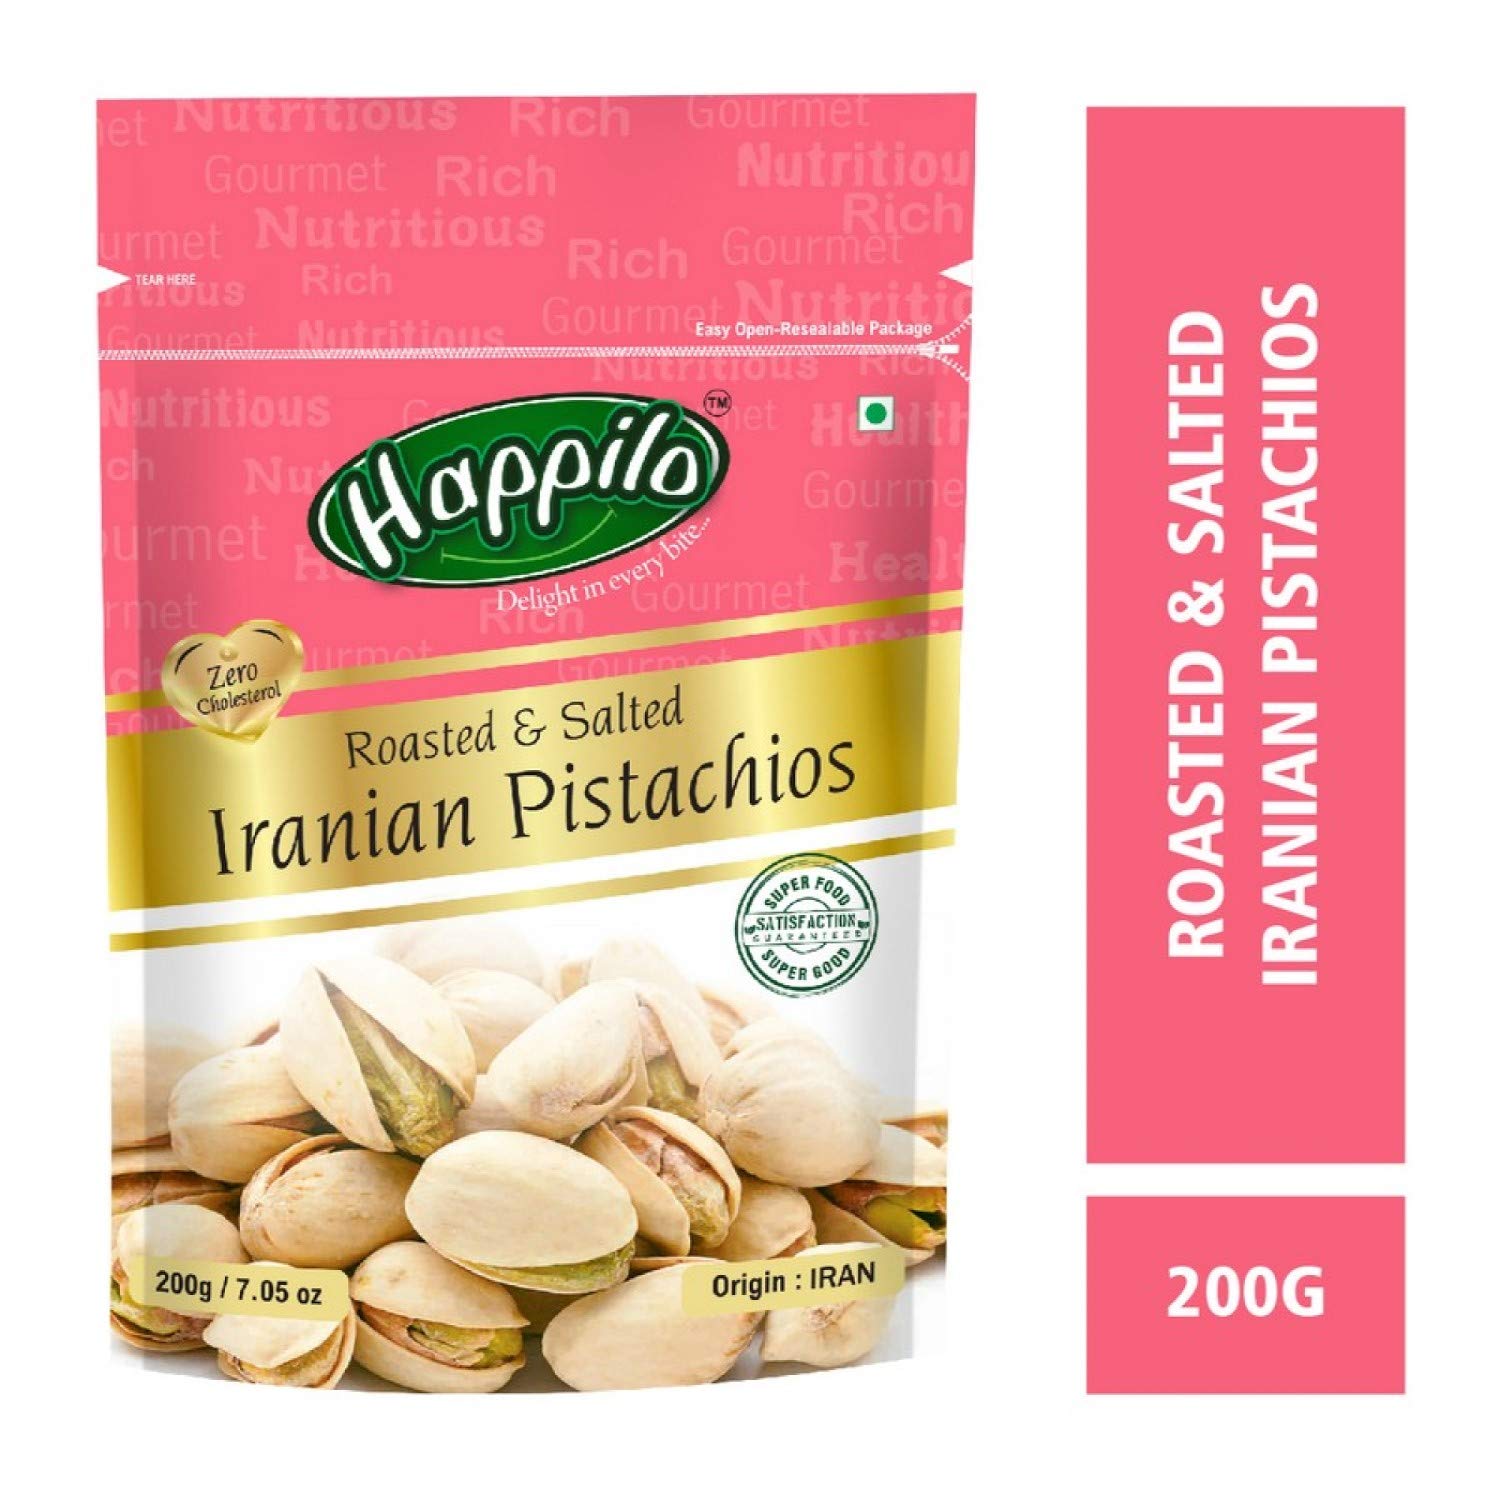 Iranian Roasted & Salted Pistachios